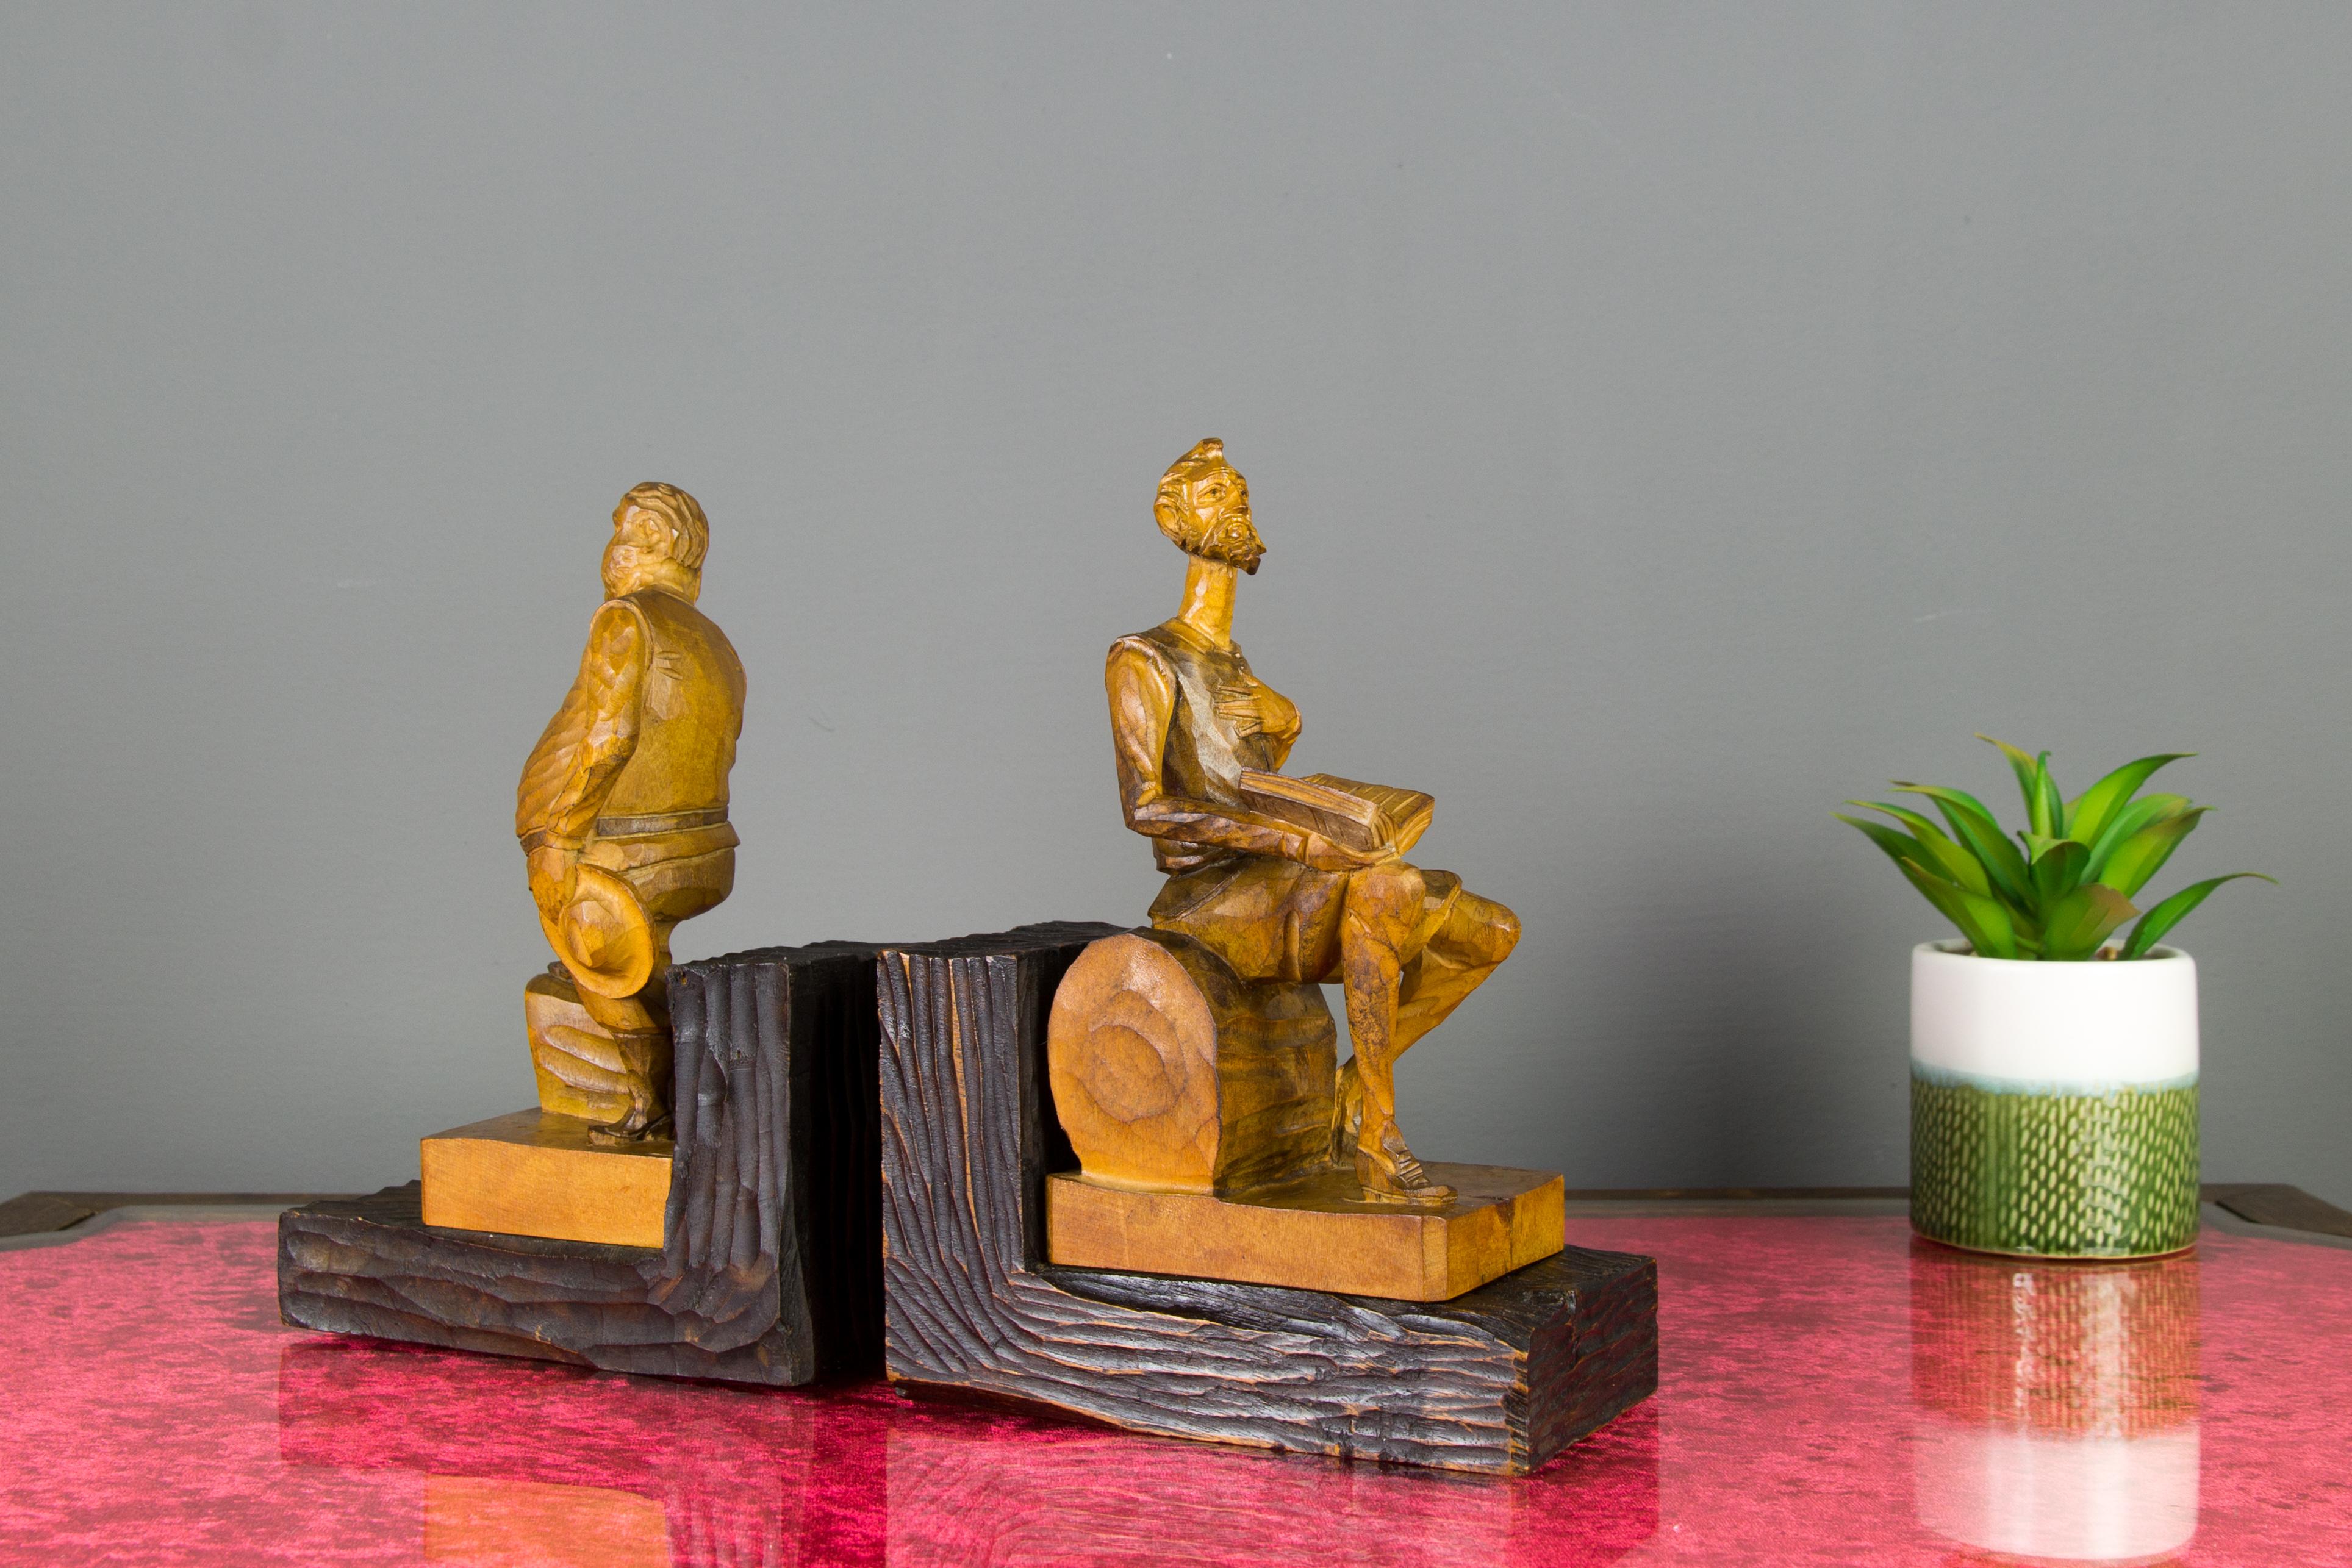 These masterfully hand-carved wooden bookends feature the main characters of the famous Spanish novel 